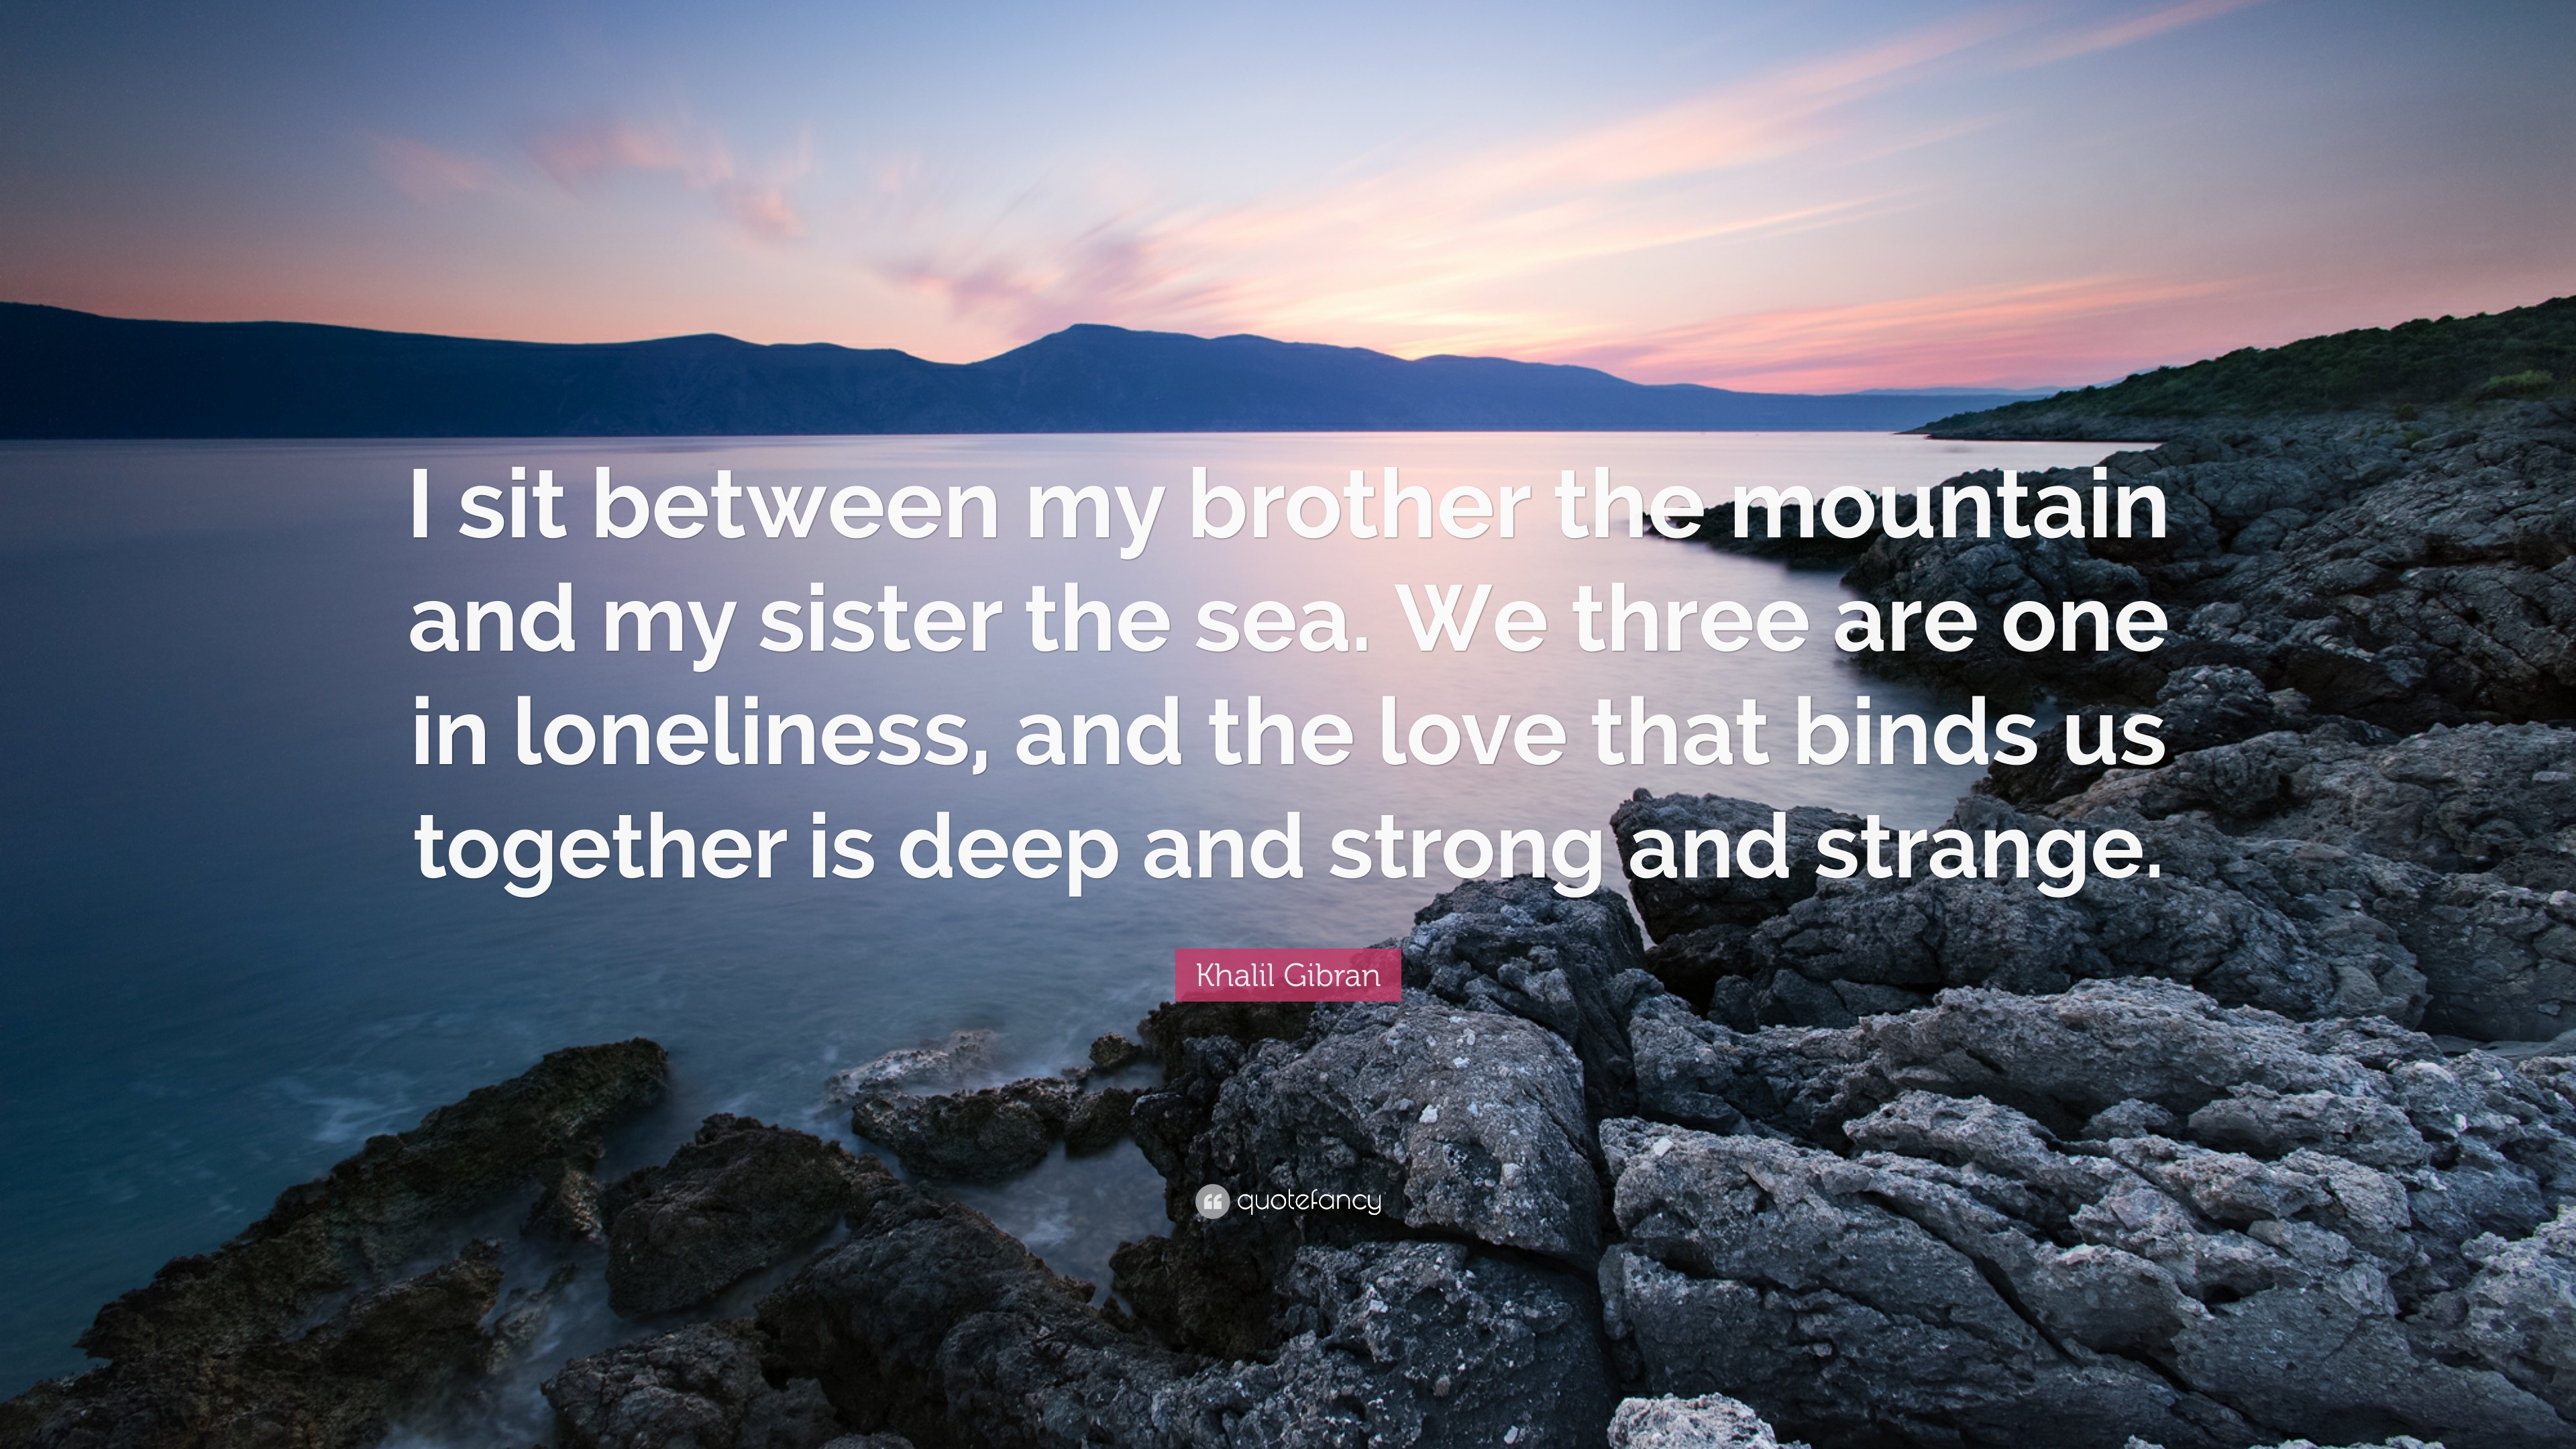 Khalil Gibran Quote “I sit between my brother the